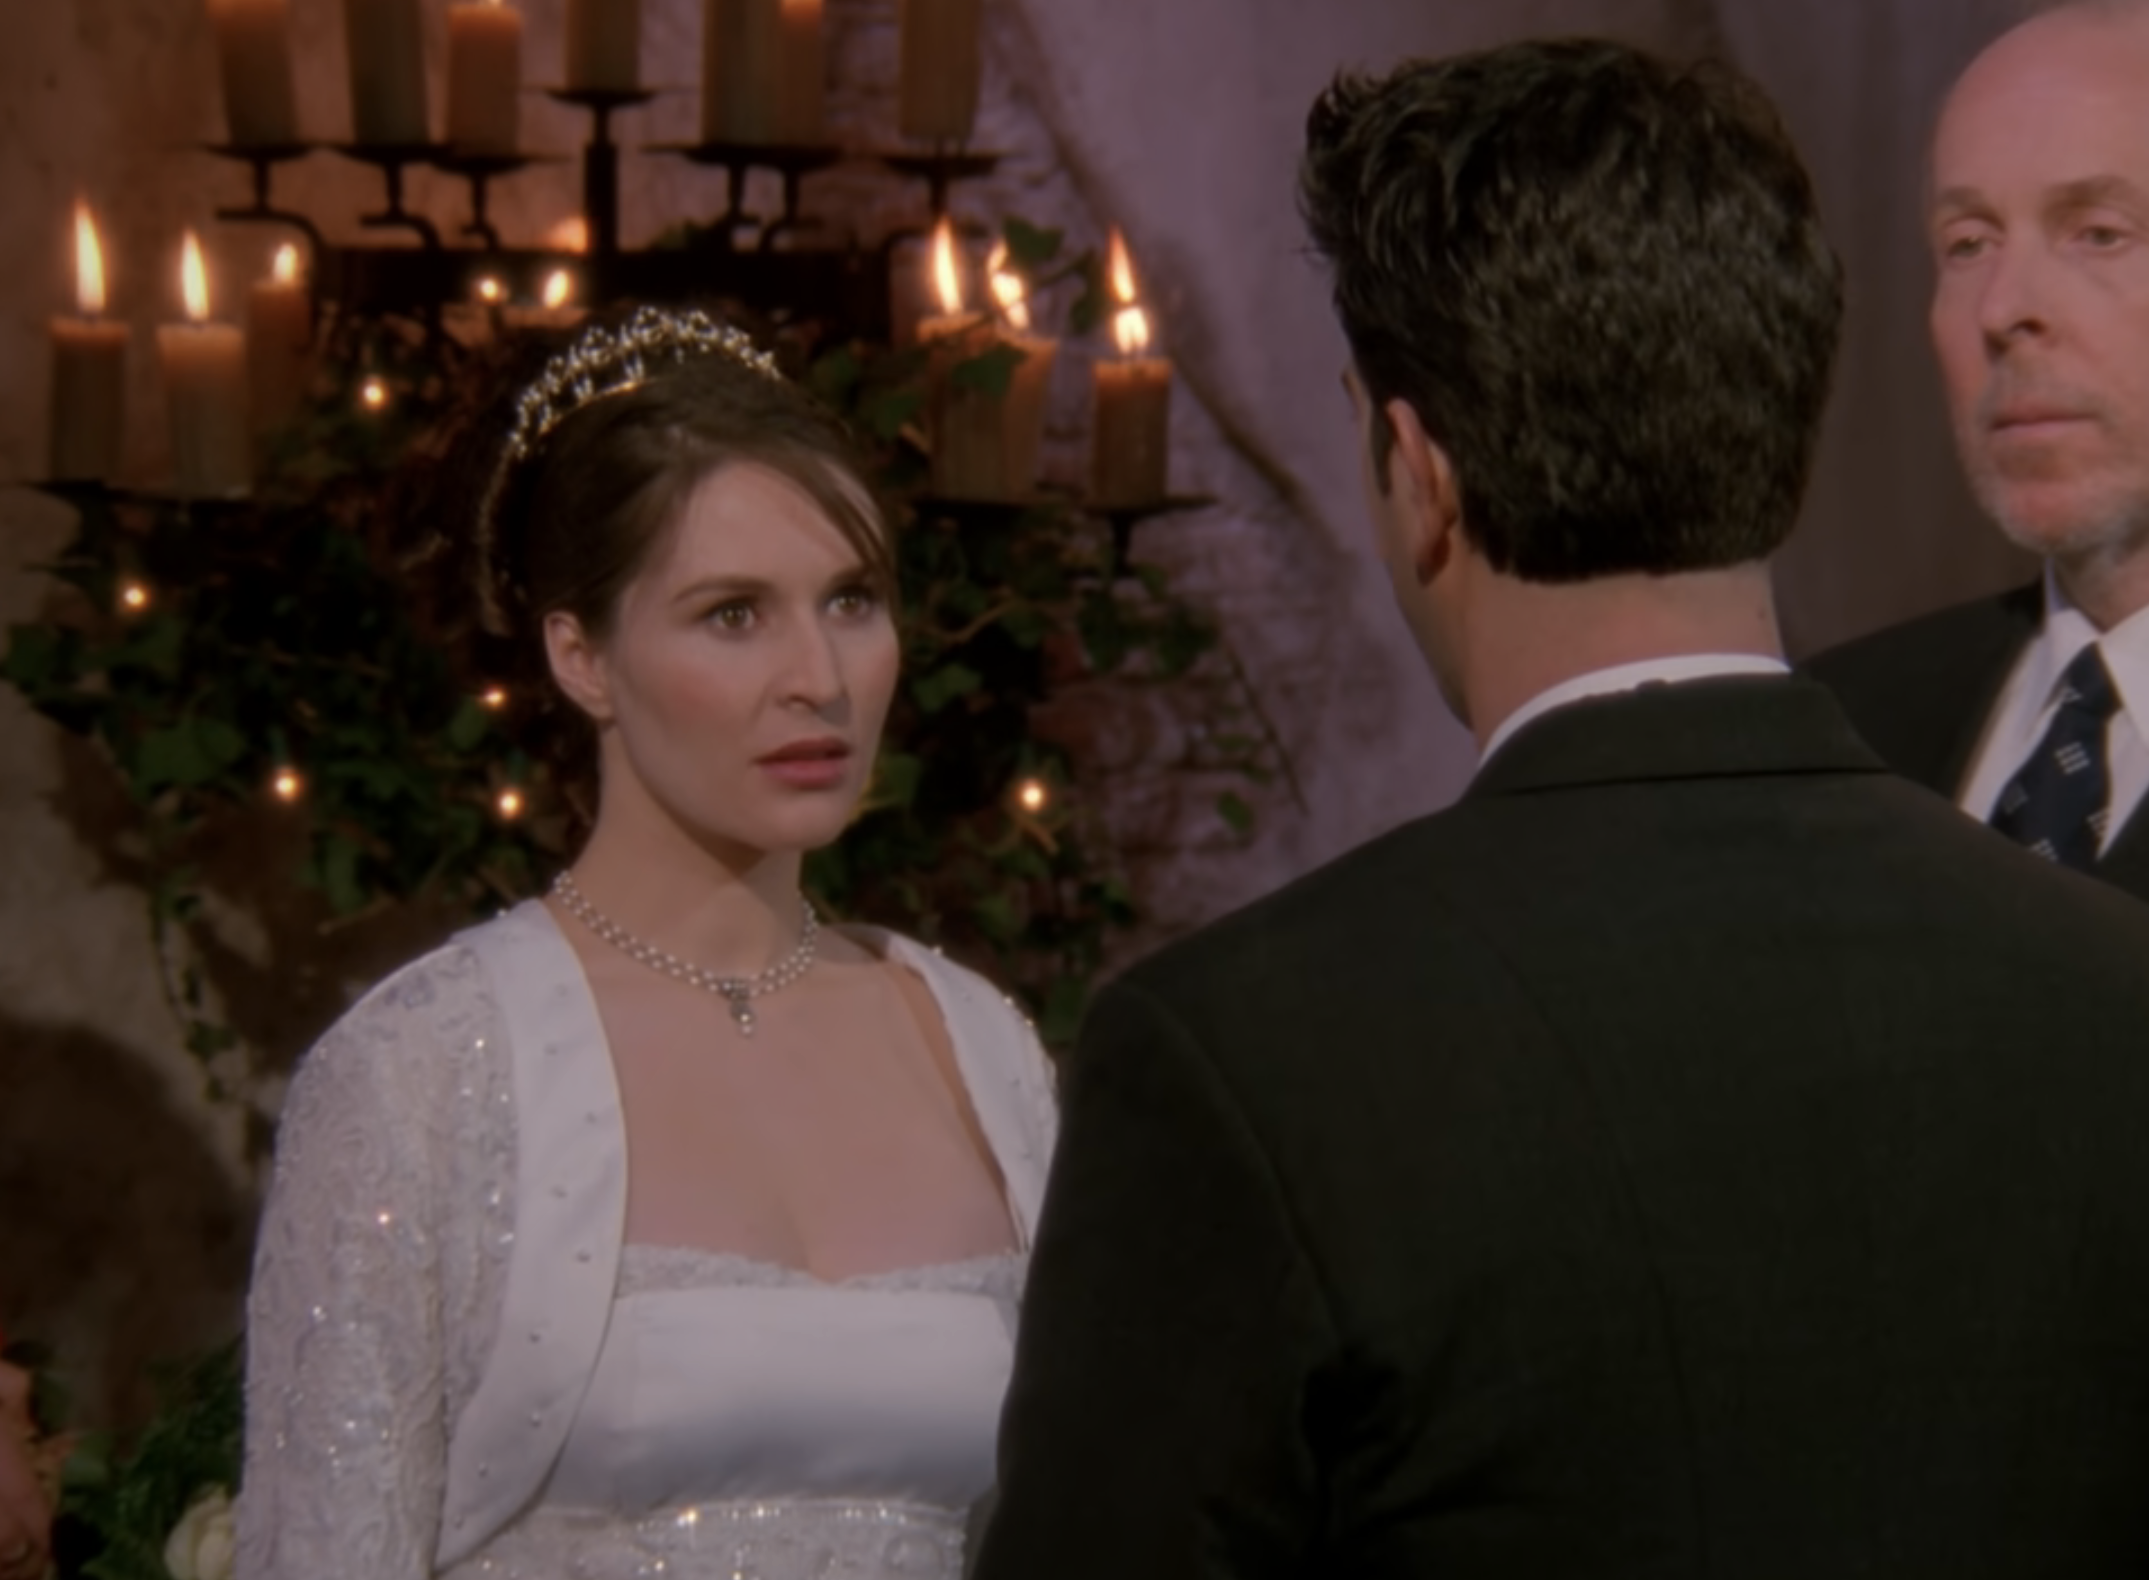 The wedding scene from the show